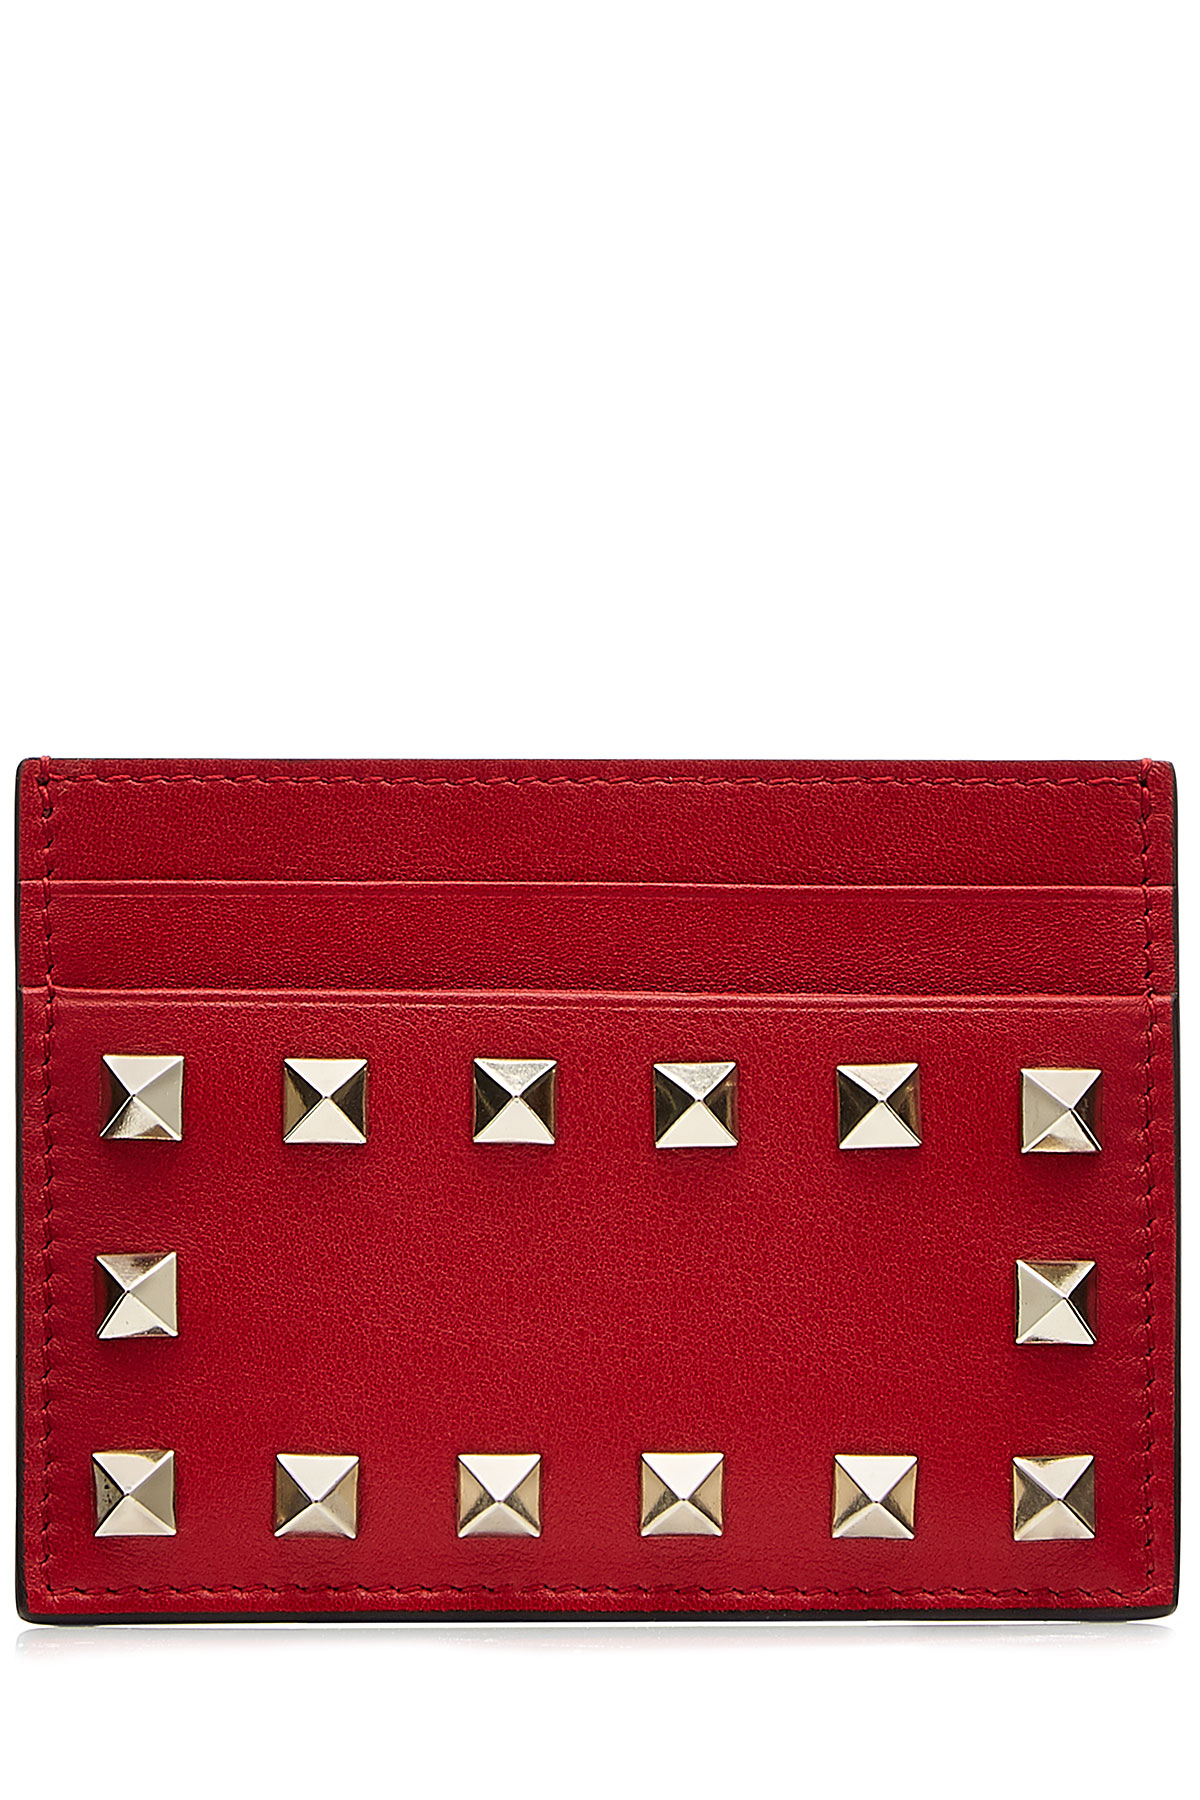 Lyst - Valentino 'rockstud' Leather Card Holder in Red